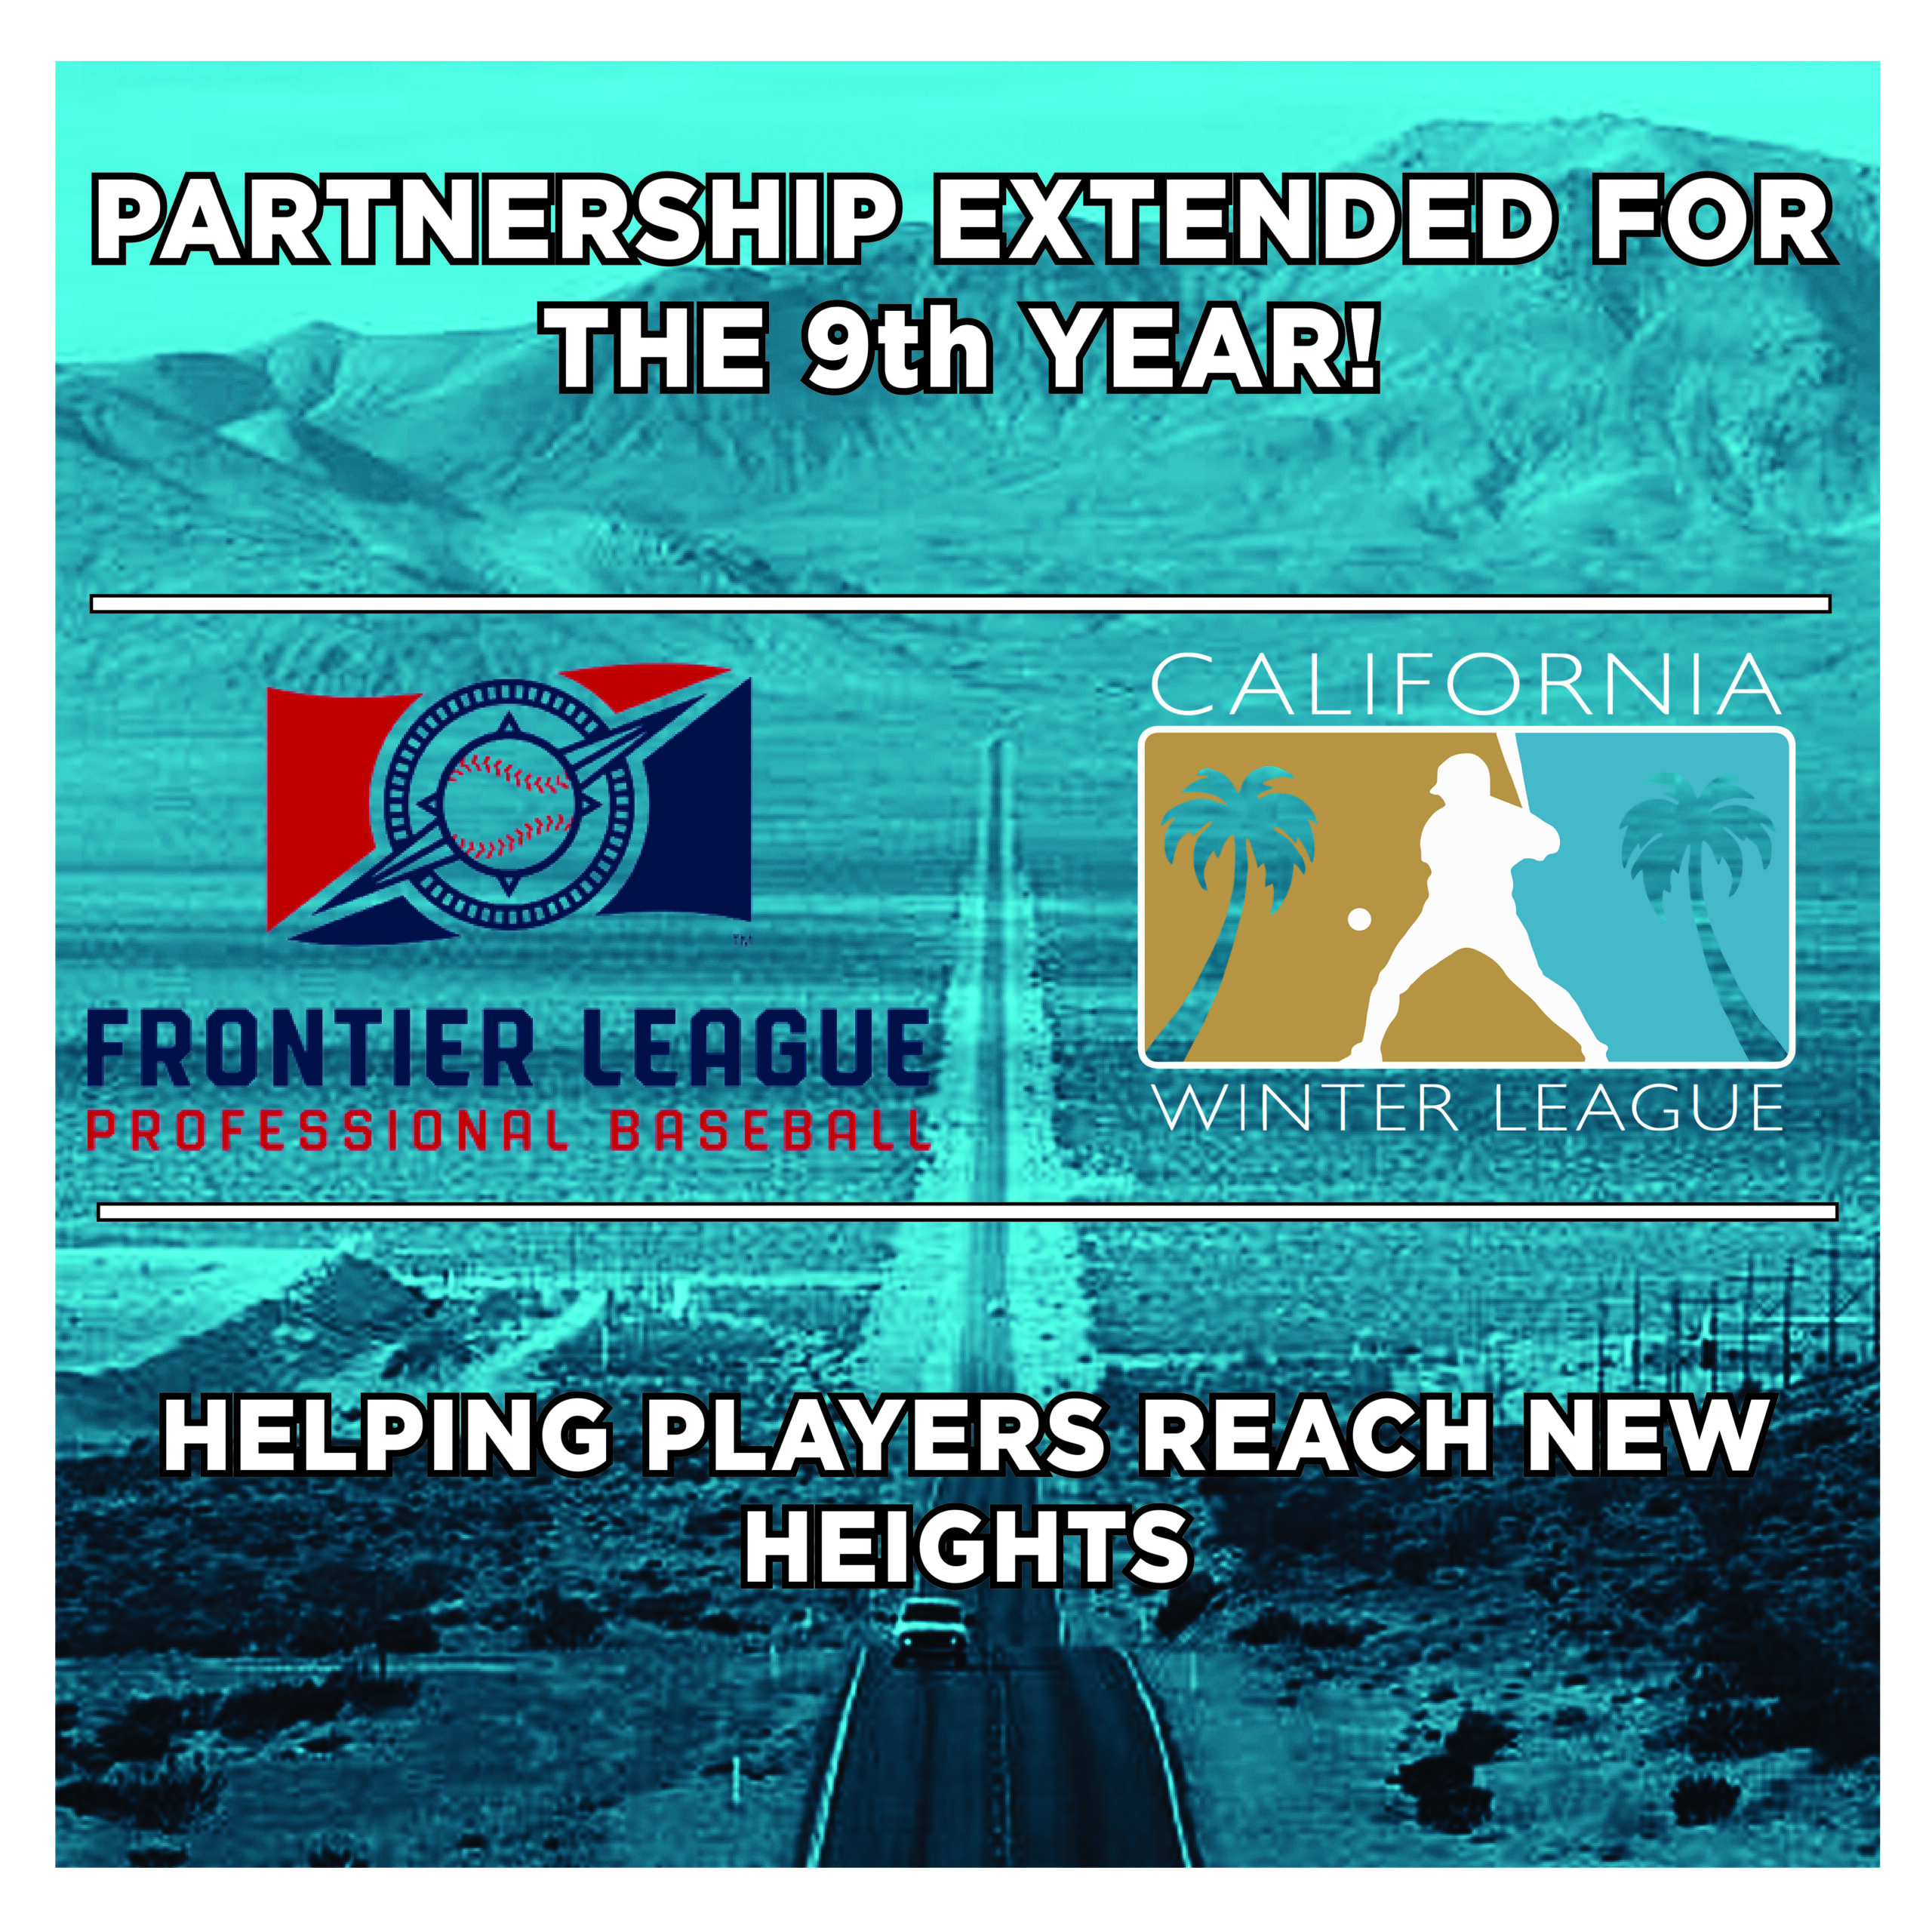 CWL and Frontier League Extend Agreement for 2023